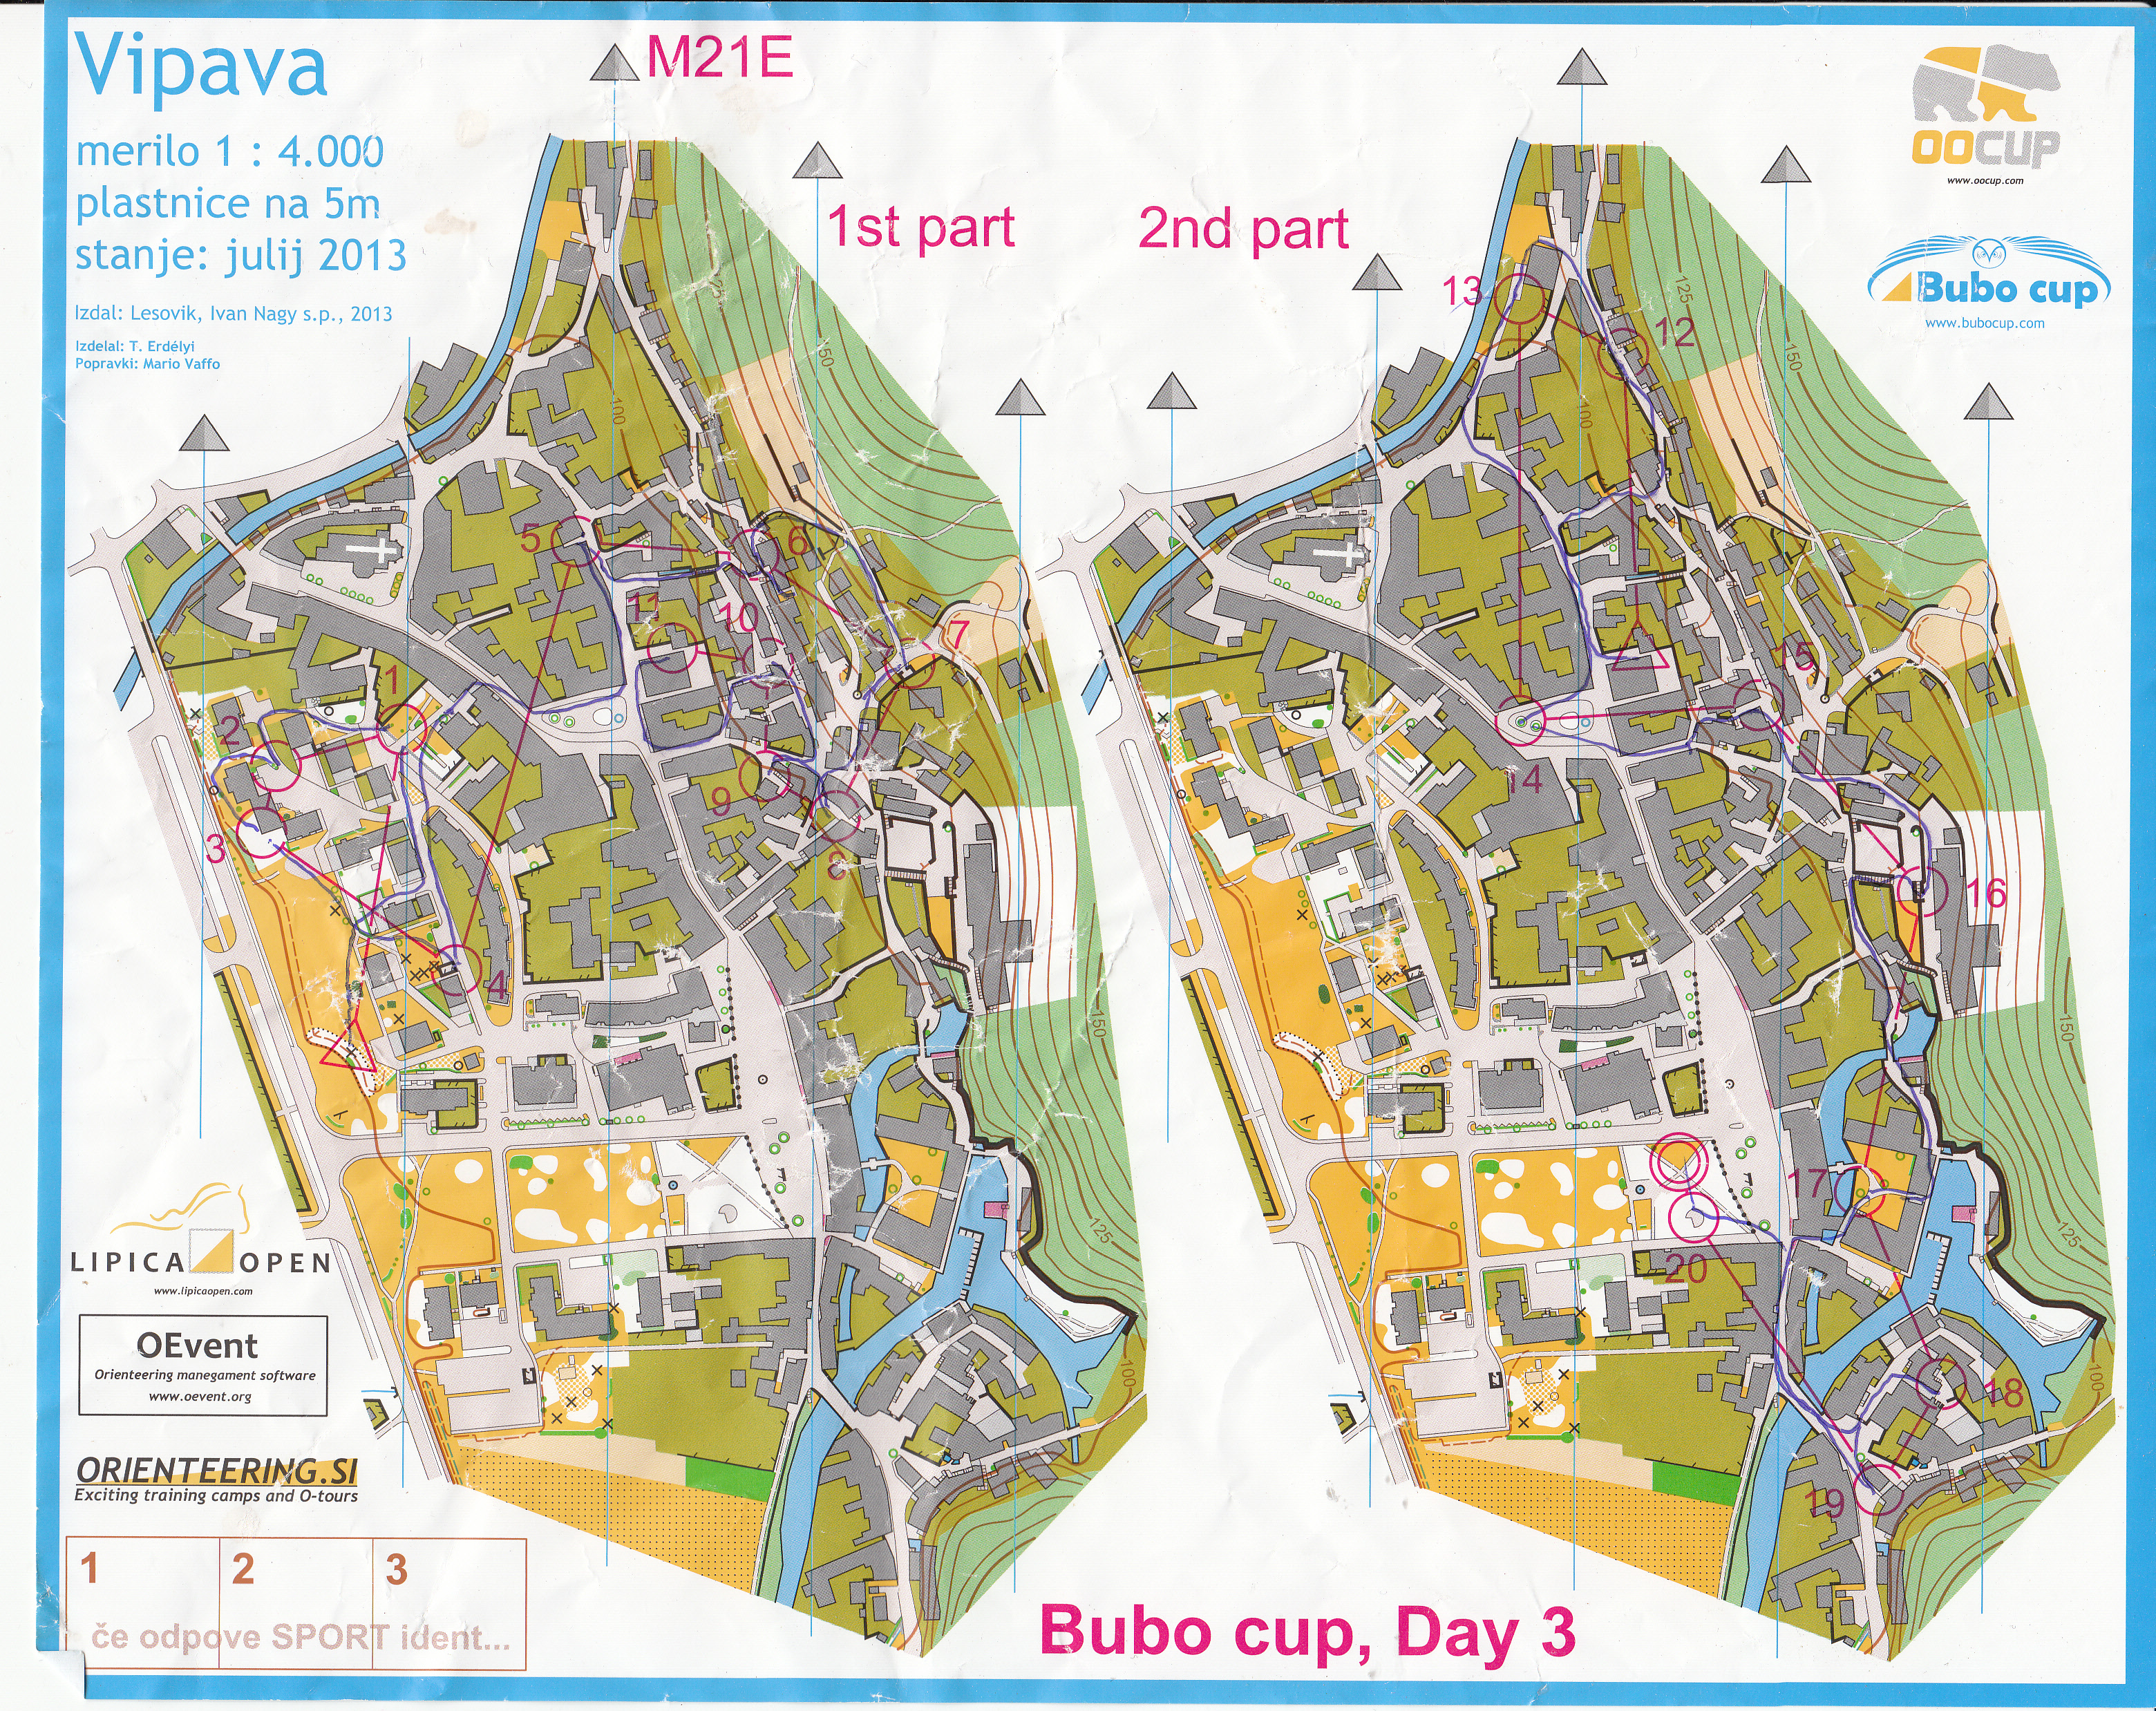 Bubo cup, Day 3 (21-07-2013)